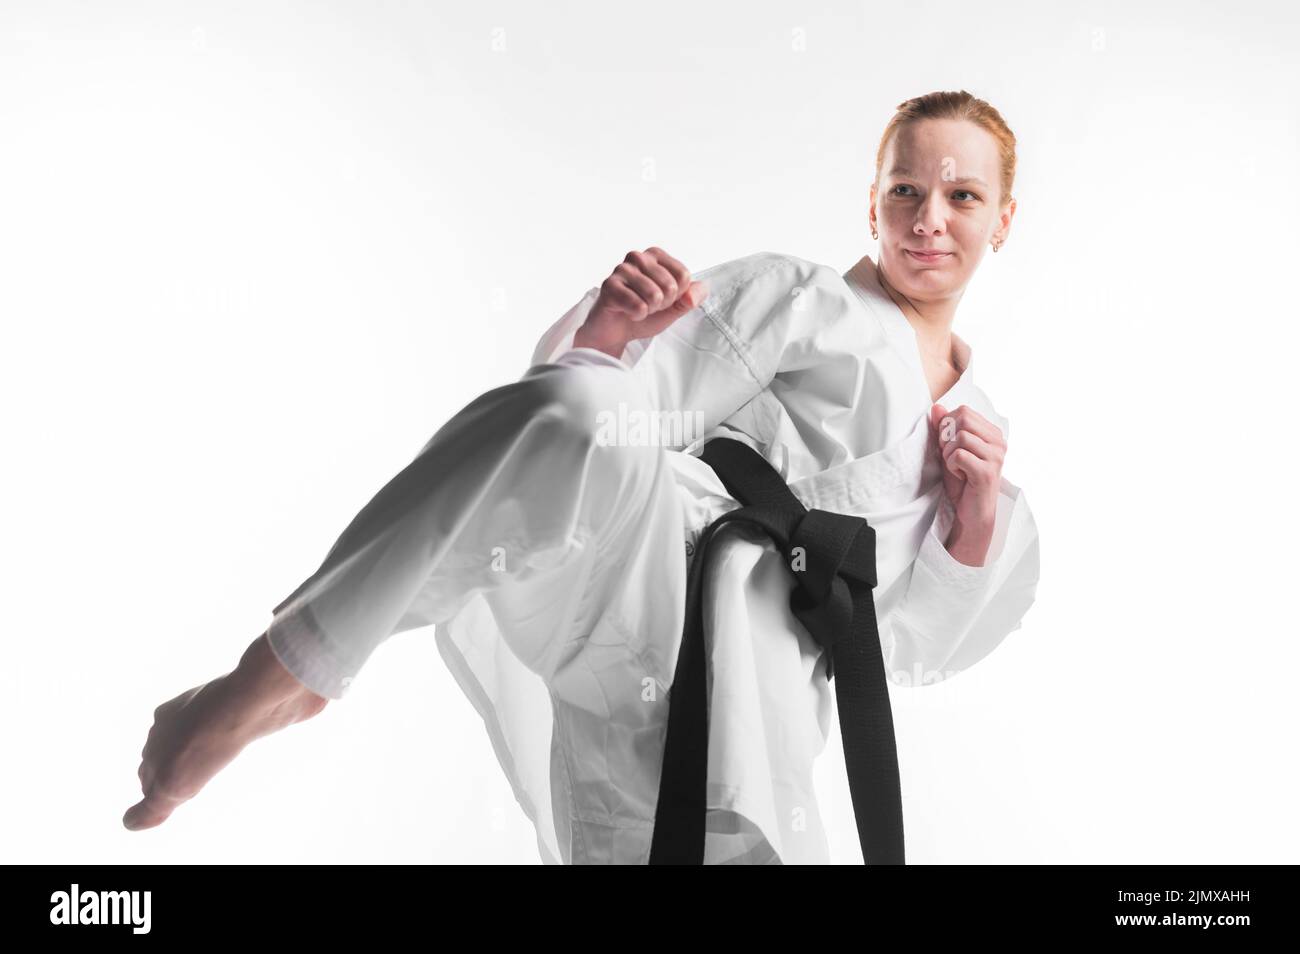 Female fighter practicing close up Stock Photo